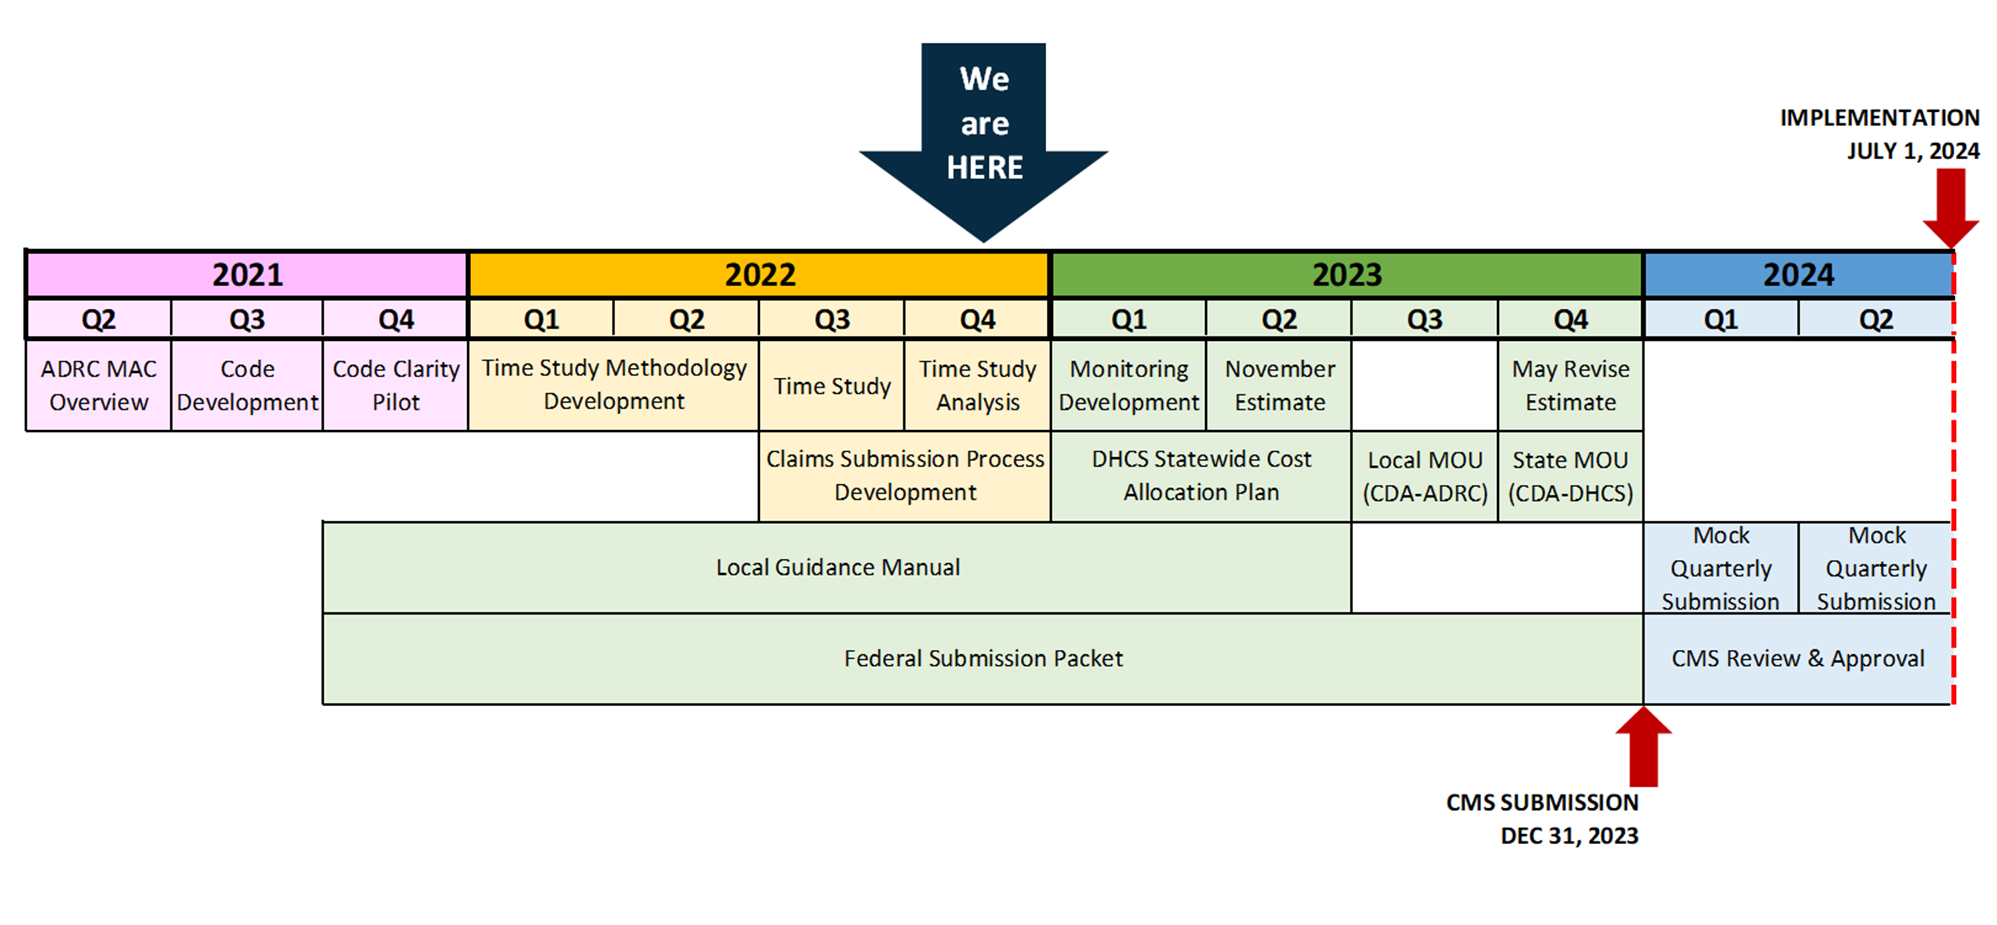 This image represents a timeline which outlines the major tasks that need to be completed in order to meet the July 1, 2024 implementation date for Medicaid Administrative Claiming. In calendar year 2021, an ADRC Medicaid Administrative Claiming overview training took place in quarter 2, codes were developed in quarter 3, and a code clarity pilot took place in quarter 4. For calendar year 2022, the time study methodology was developed in quarters 1 and 2, the time study took place in quarter 3, and the time study analysis will be conducted in quarter 4. The claims submission process will also be developed in quarters 3 and 4. In calendar year 2023, monitoring processes will be developed in quarter 1, the November estimate will be completed in quarter 2, and the May revision estimate will be completed in quarter 4. Also, the DHCS statewide cost allocation plan will be updated in quarters 1 and 2, the local MOU between CDA and ADRC partners will be drafted in quarter 3, and the state MOU between CDA and DHCS will be drafted in quarter 4. The local guidance manual and federal submission packets will be developed simultaneously throughout calendar years 2021, 2022, and 2023. The federal packet to CMS will be submitted by December 31, 2023 to allow 6 months for review and approval prior to full implementation by July 1, 2024. During calendar year 2024, while awaiting review and approval by CMS, mock quarterly submissions will be conducted during quarters 1 and 2.